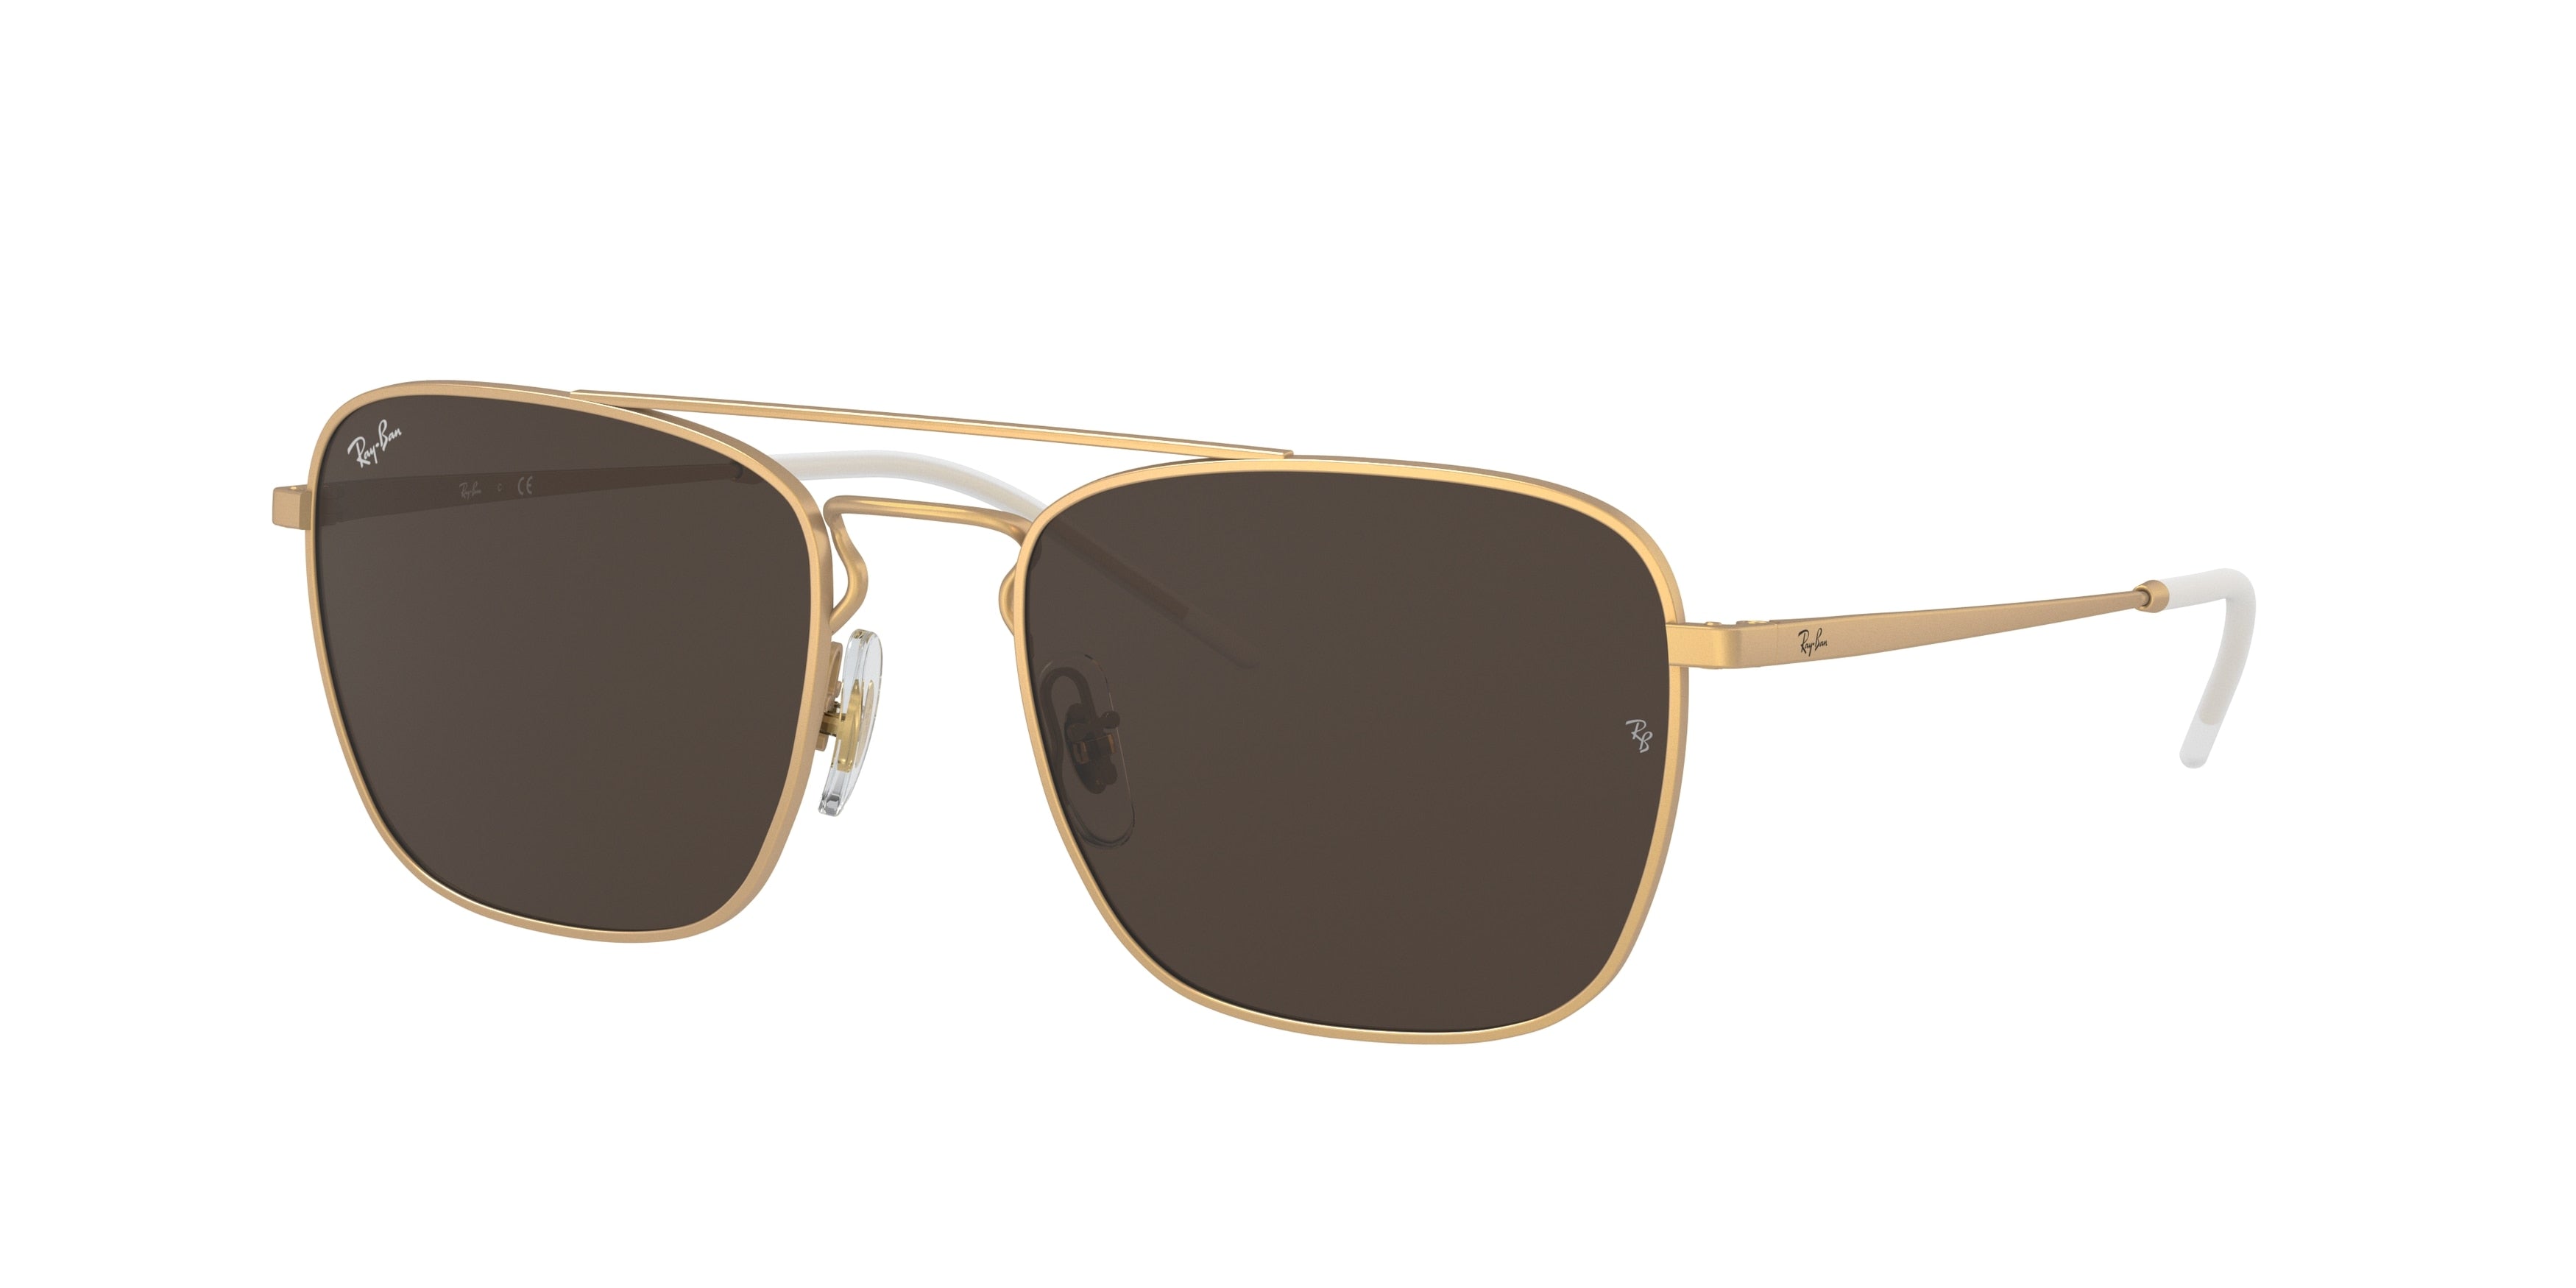 Ray-Ban RB3588 Square Sunglasses  901373-Gold 55-140-19 - Color Map Gold